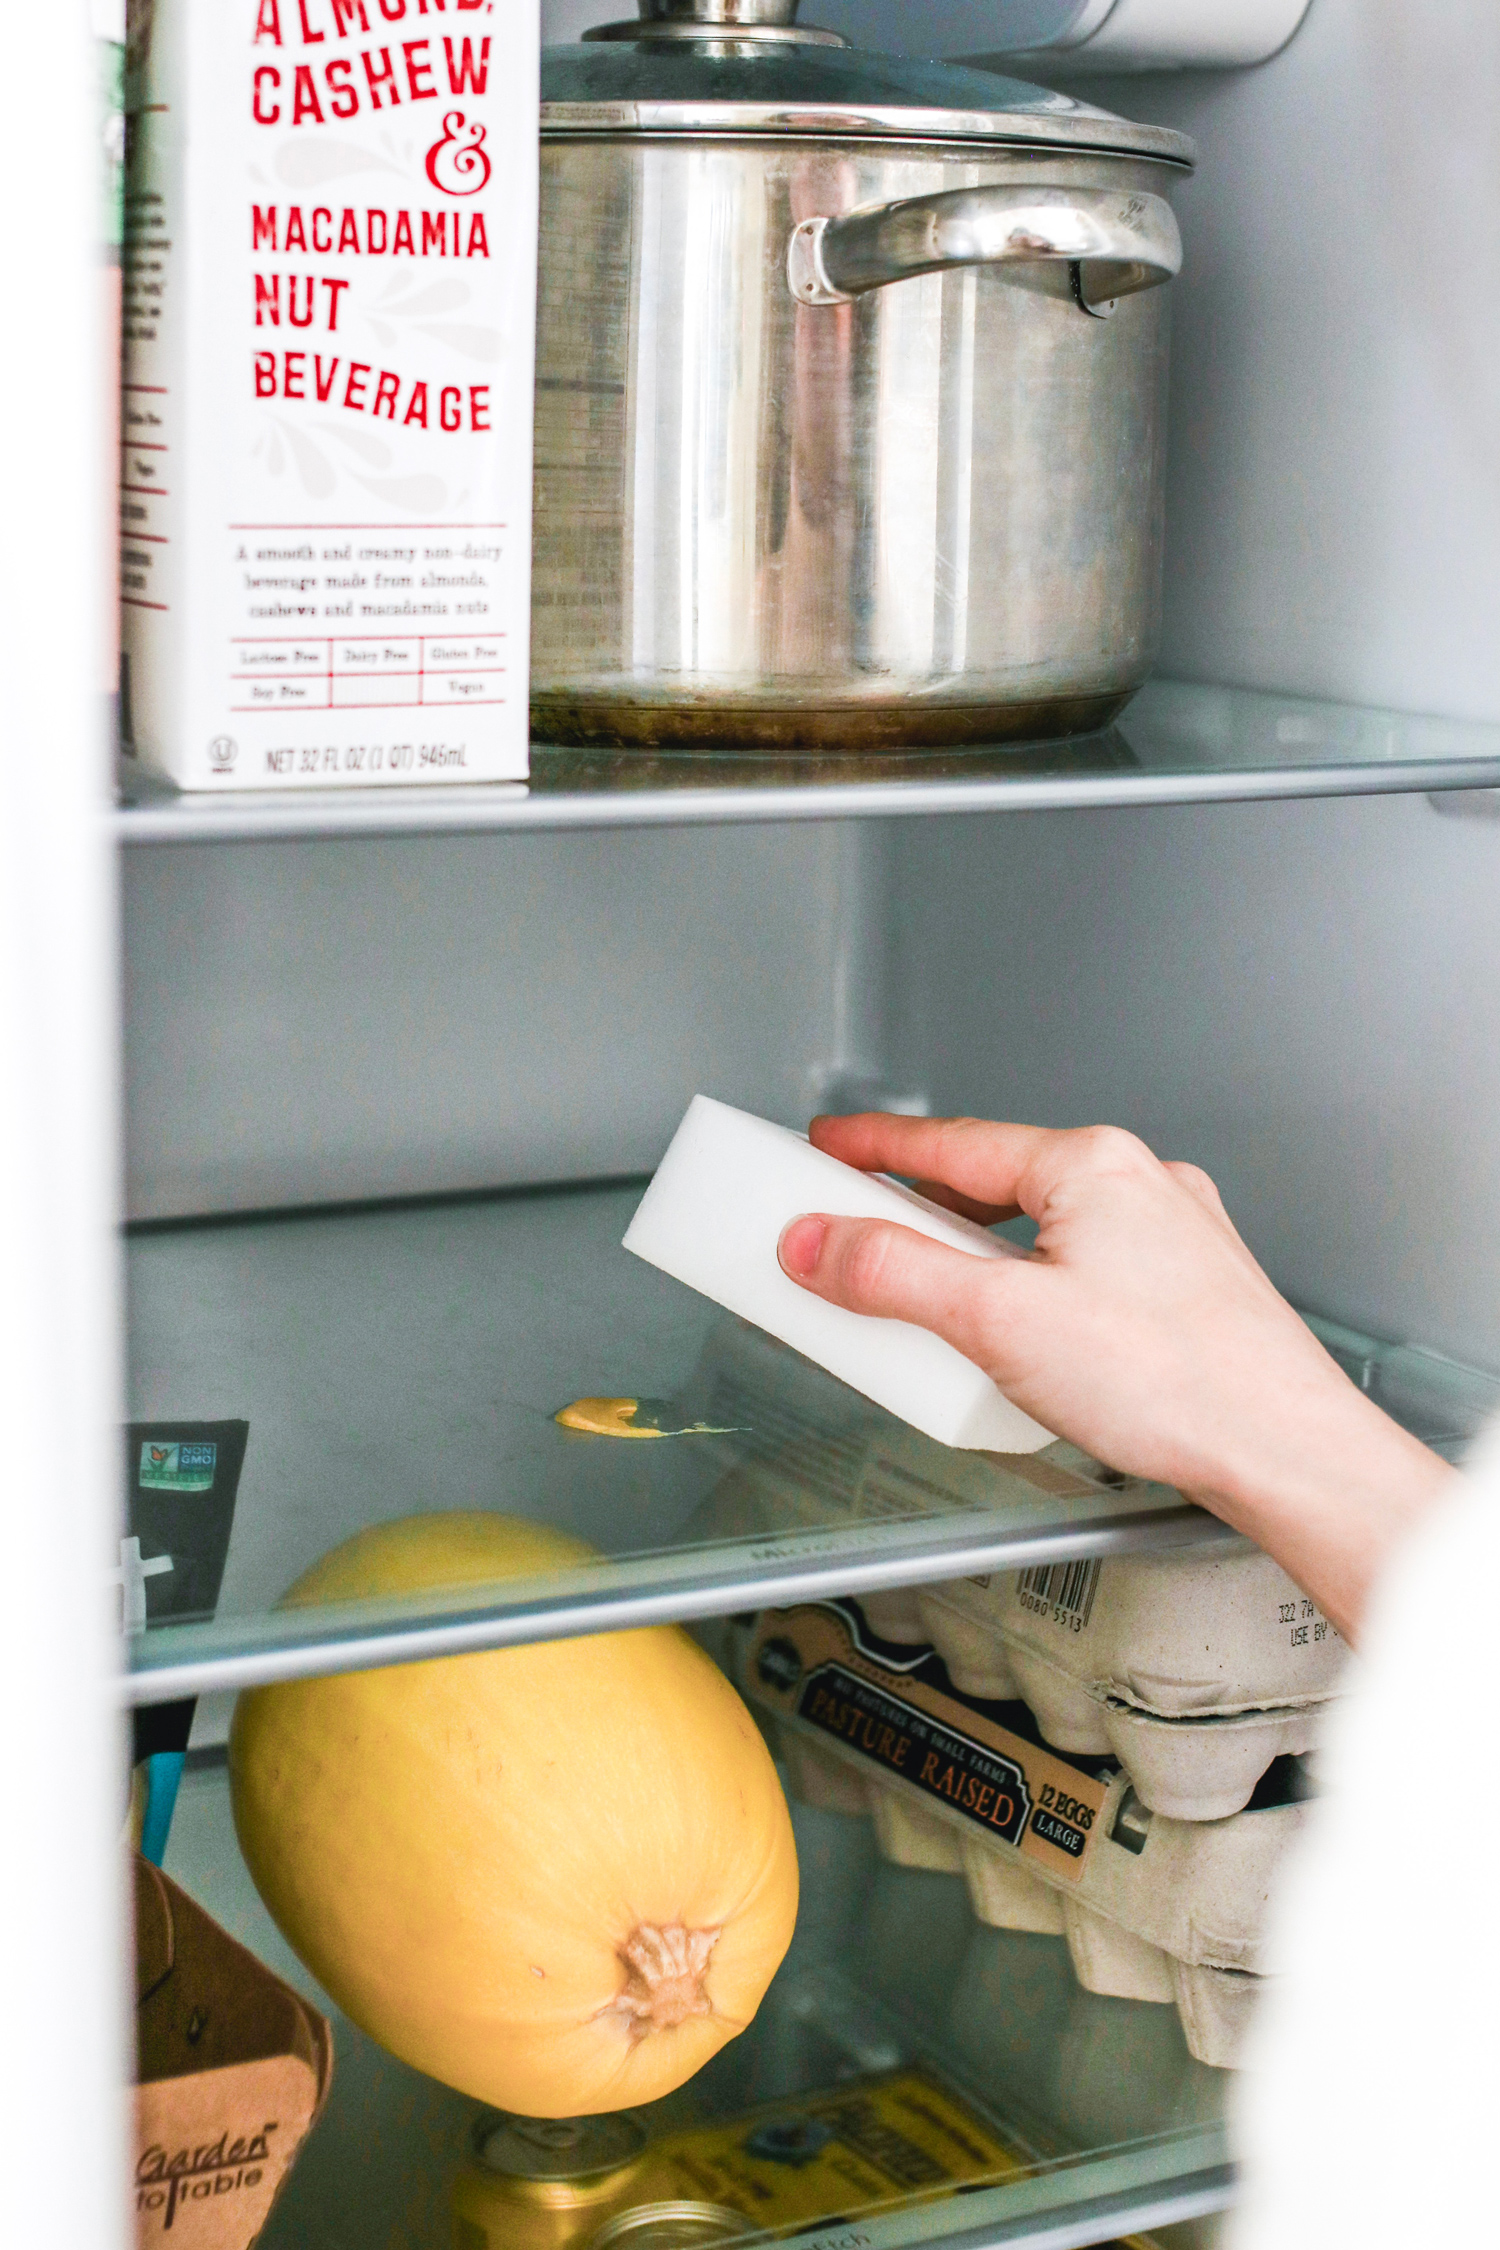 Mystery smell coming from the fridge? Learn how to deep clean your refrigerator, and get 2 easy recipes for disinfecting and deodorizing it.